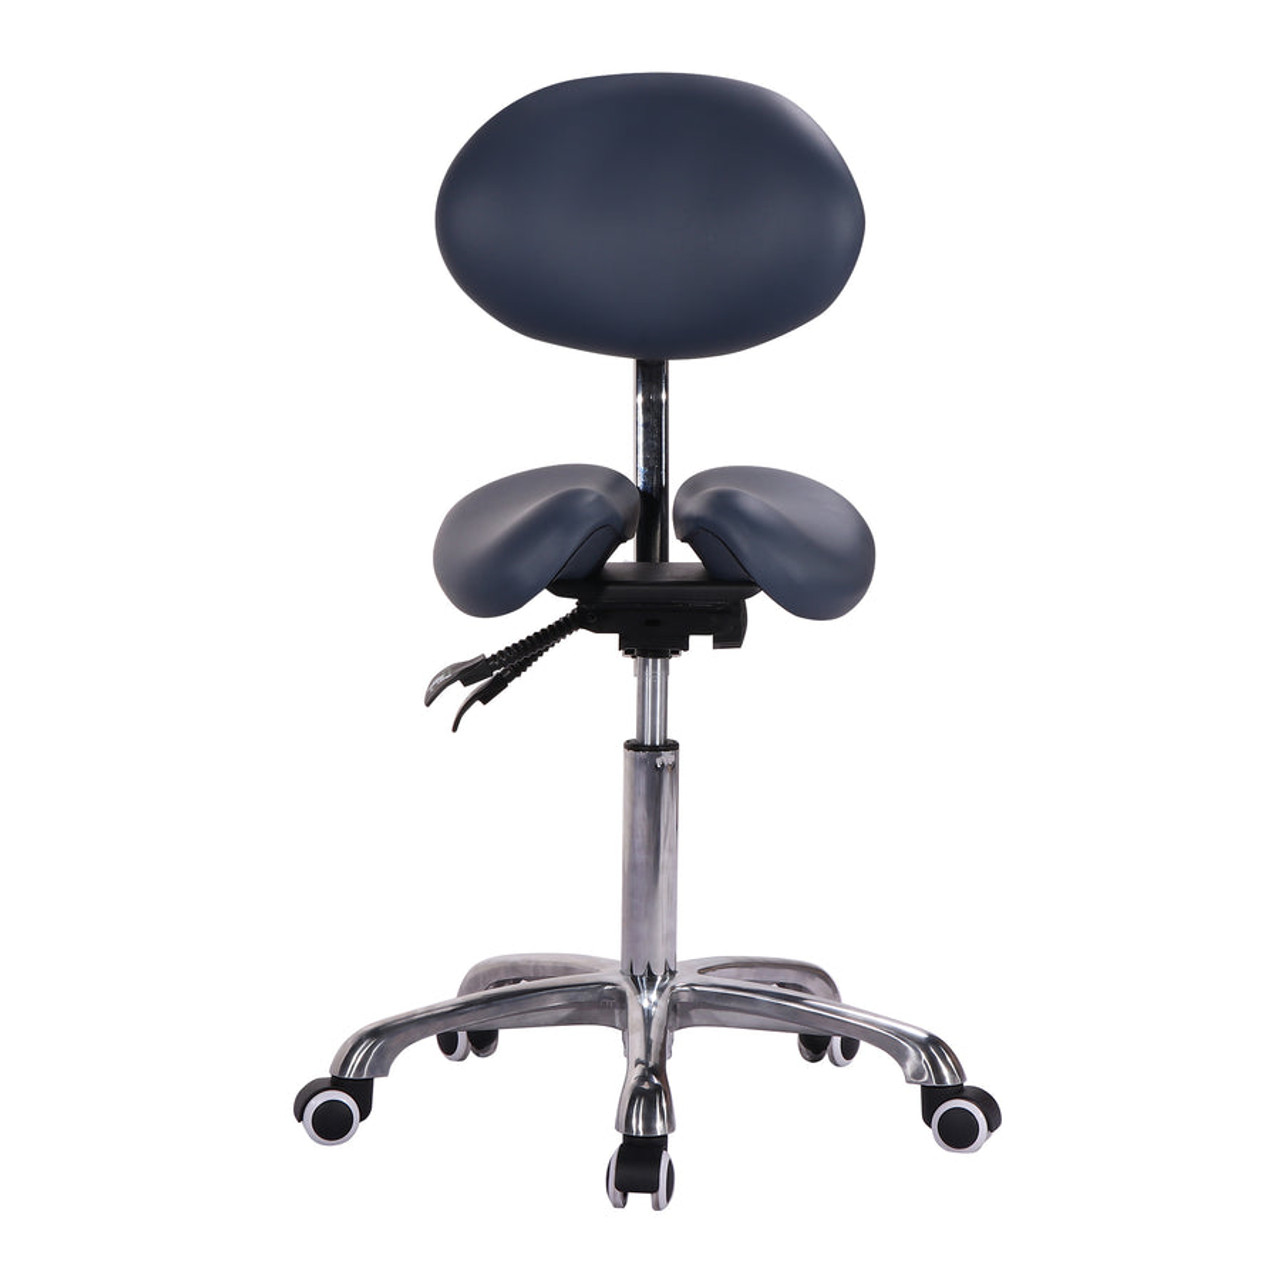 GotHobby Red Salon Stool Saddle Chair Facial Tattoo Beauty Massage PU  Leather Hydraulic | Saddle chair, Chair, Rolling chair